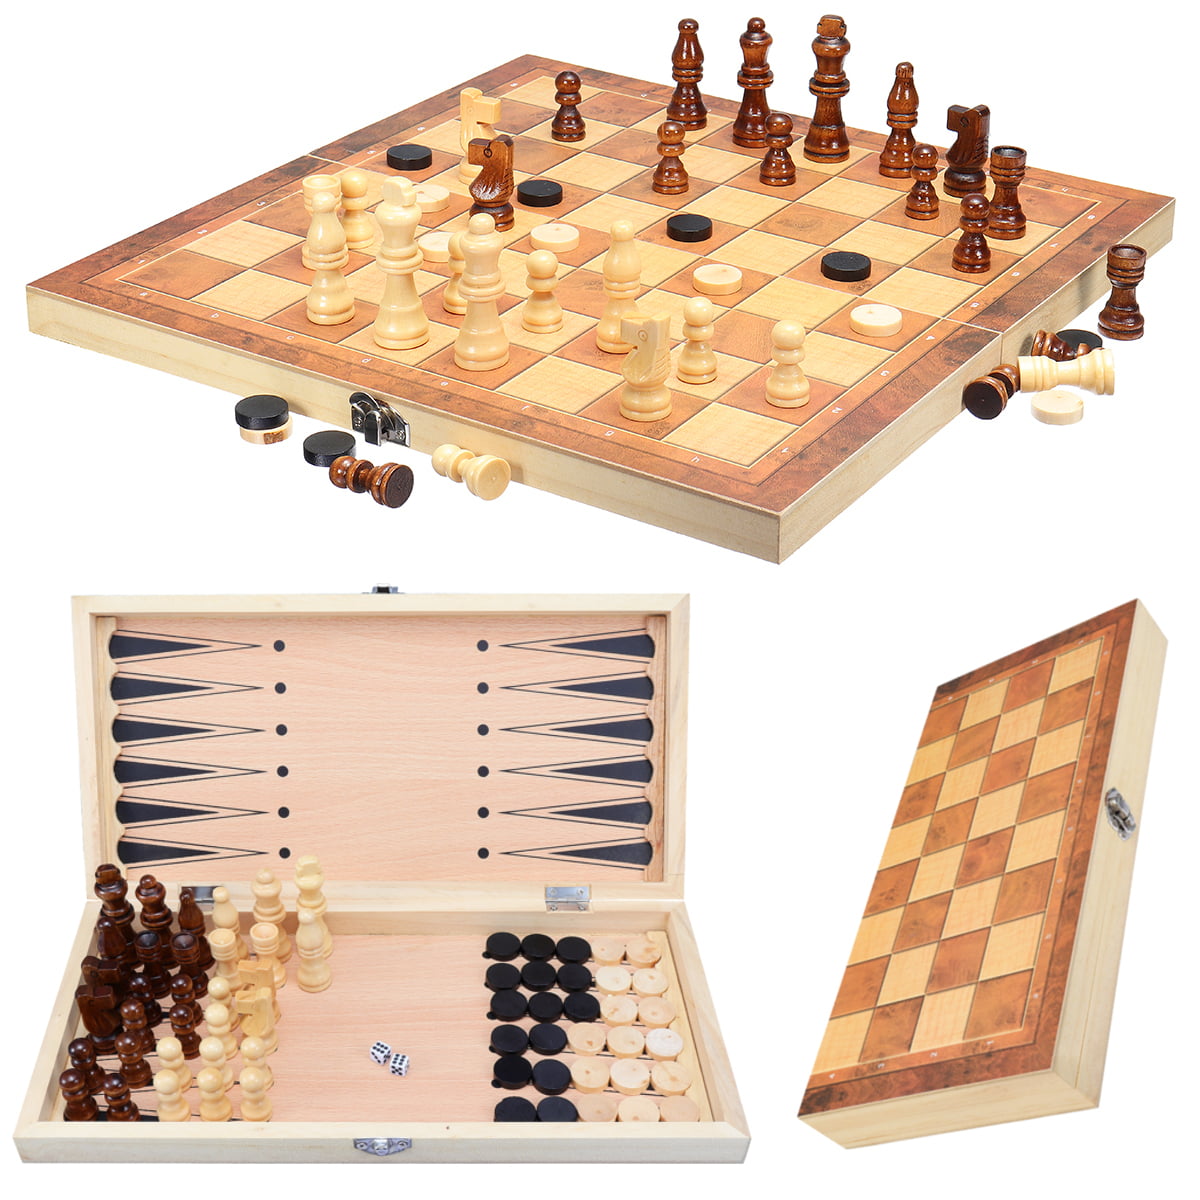 Details about   3 in1 FOLDING WOODEN CHESS SET Board Game Checkers Backgammon Draughts Gift ` 